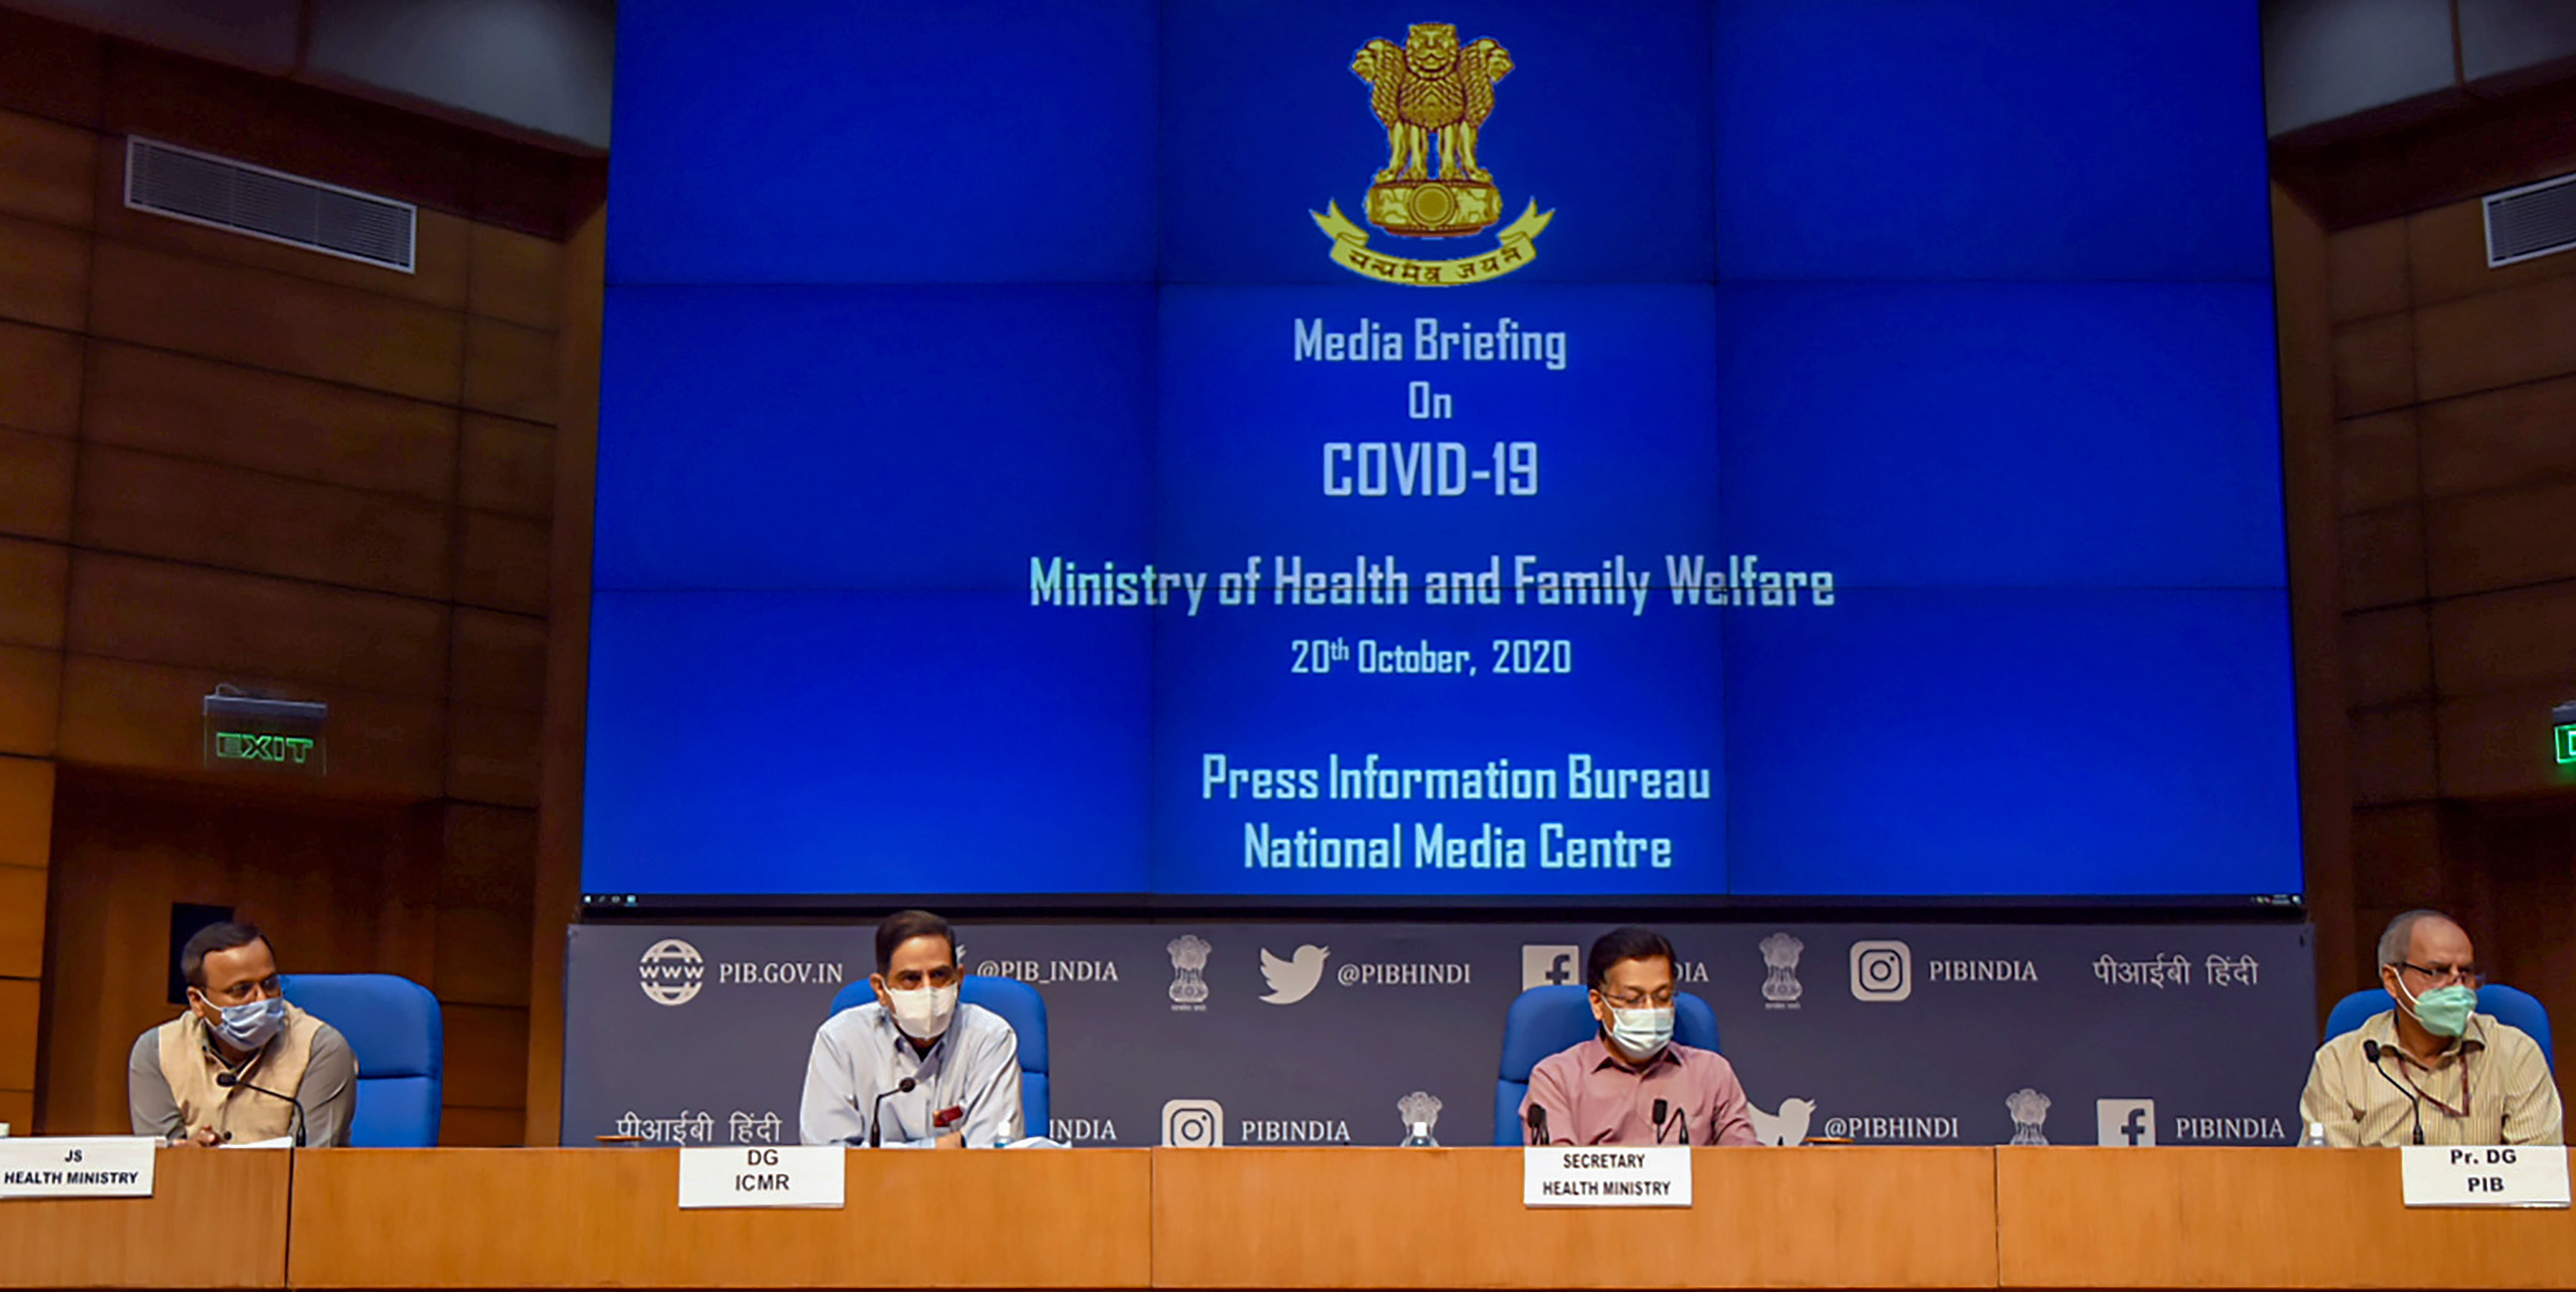 Secretary, Ministry of Health & Family Welfare, Rajesh Bhushan addresses a press conference on the actions taken, preparedness, and updates on Covid-19. Credits: PTI Photo